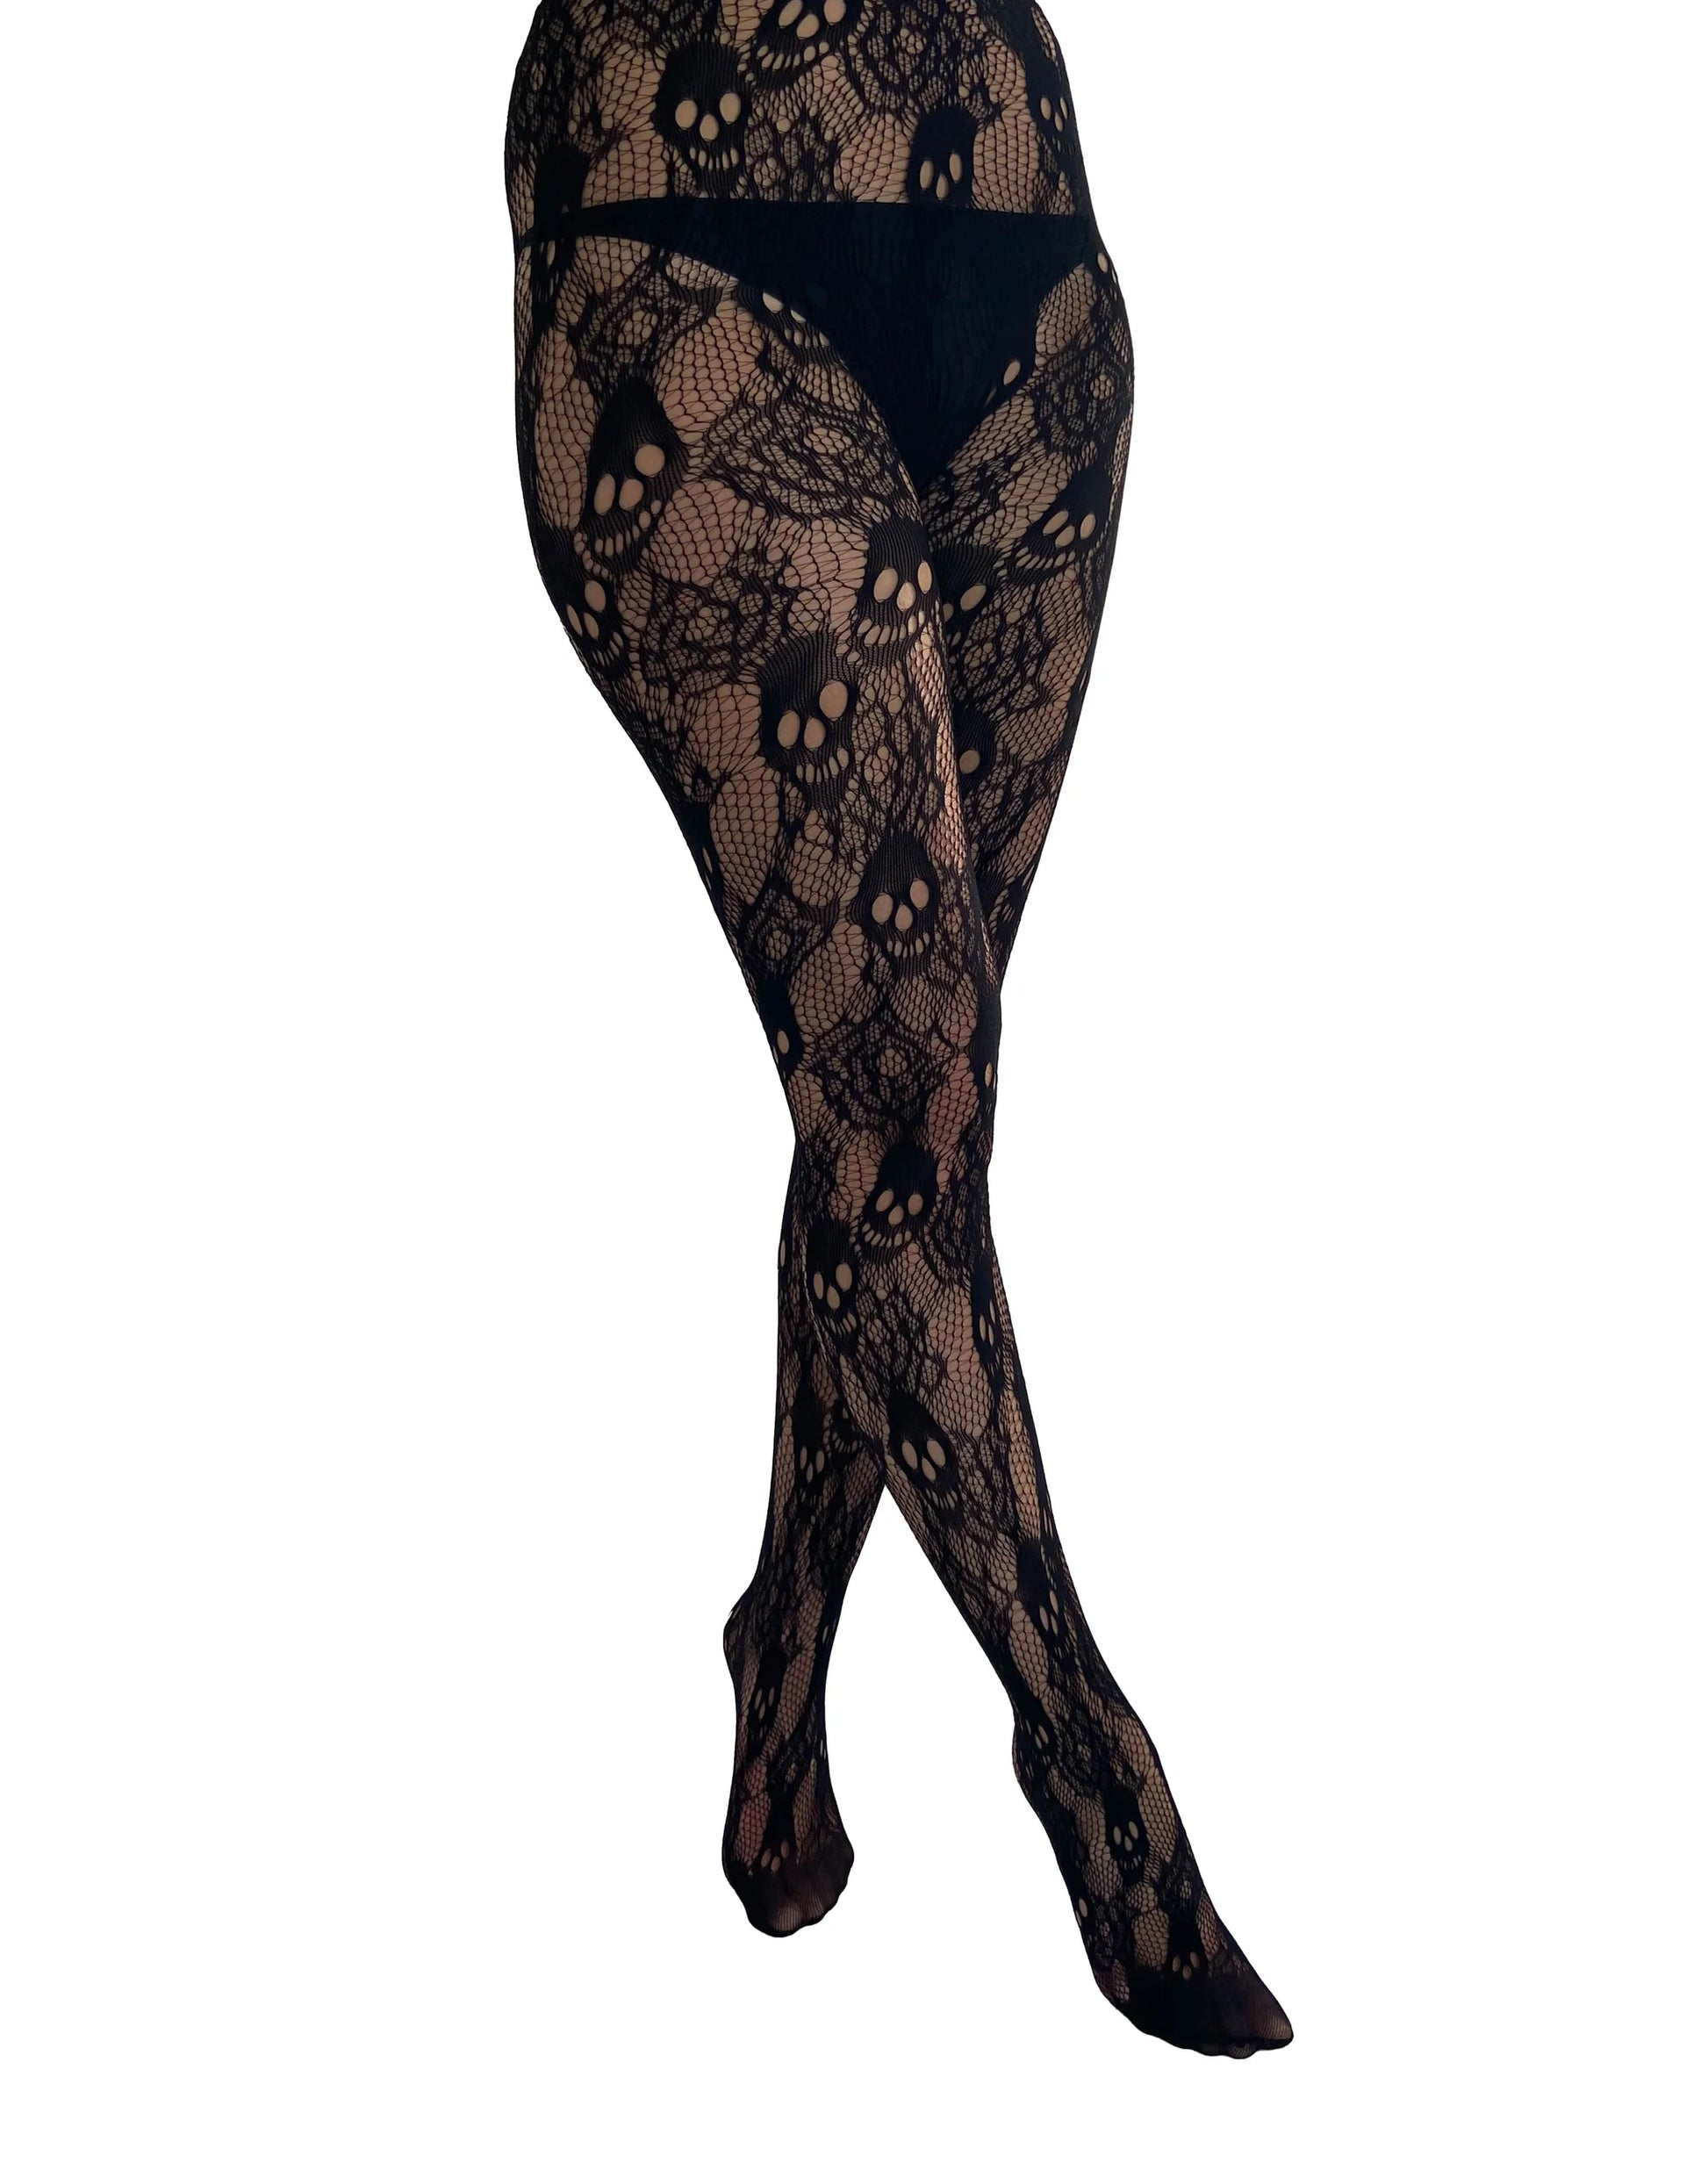 Pamela Mann Rose Skull Net Tights - Black openwork fishnet tights with a roses and skull lace style pattern.